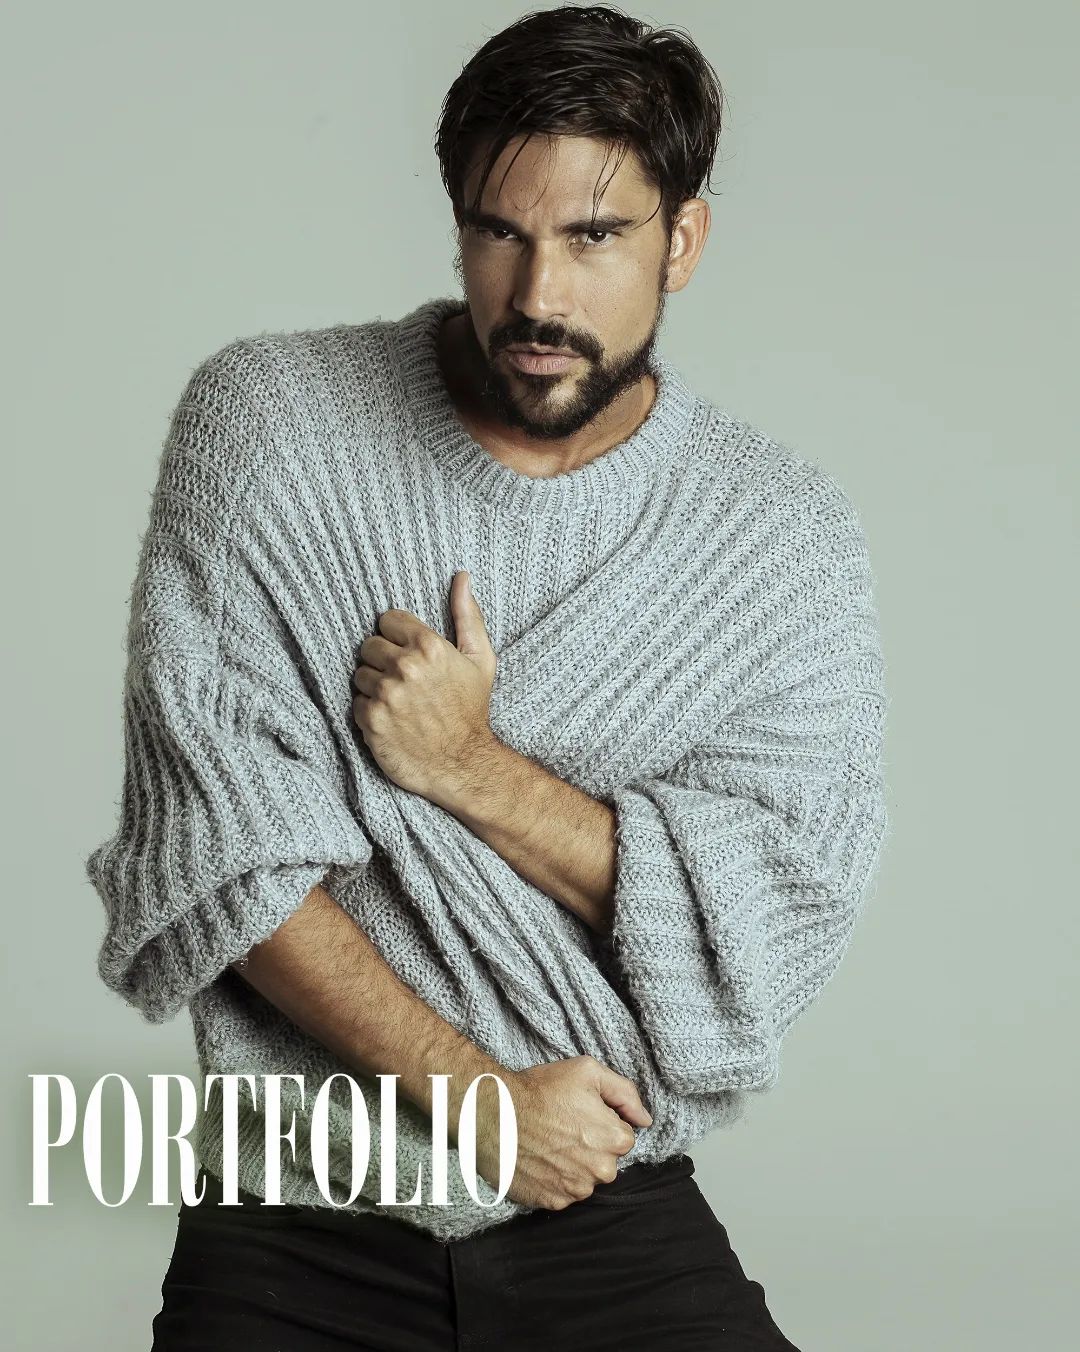 https://f.radikal.host/2023/04/06/Photo-by-REVISTA-PORTFOLIO-BRAZIL-on-March-19-2023.-May-be-an-image-of-1-person-beard-standing-and-text-that-says-PORTFOLIO..jpg